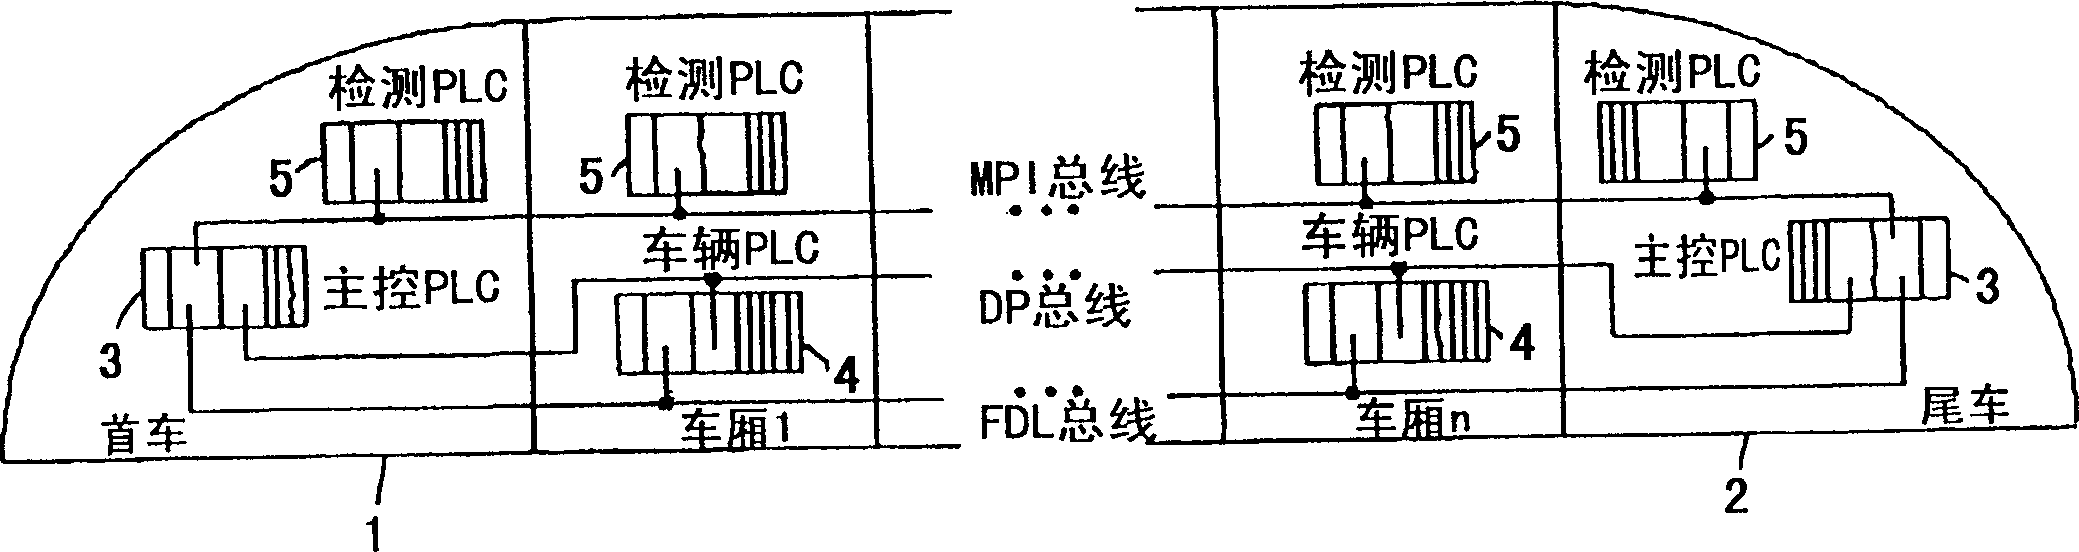 Magnetic suspension train operation controlling system and method